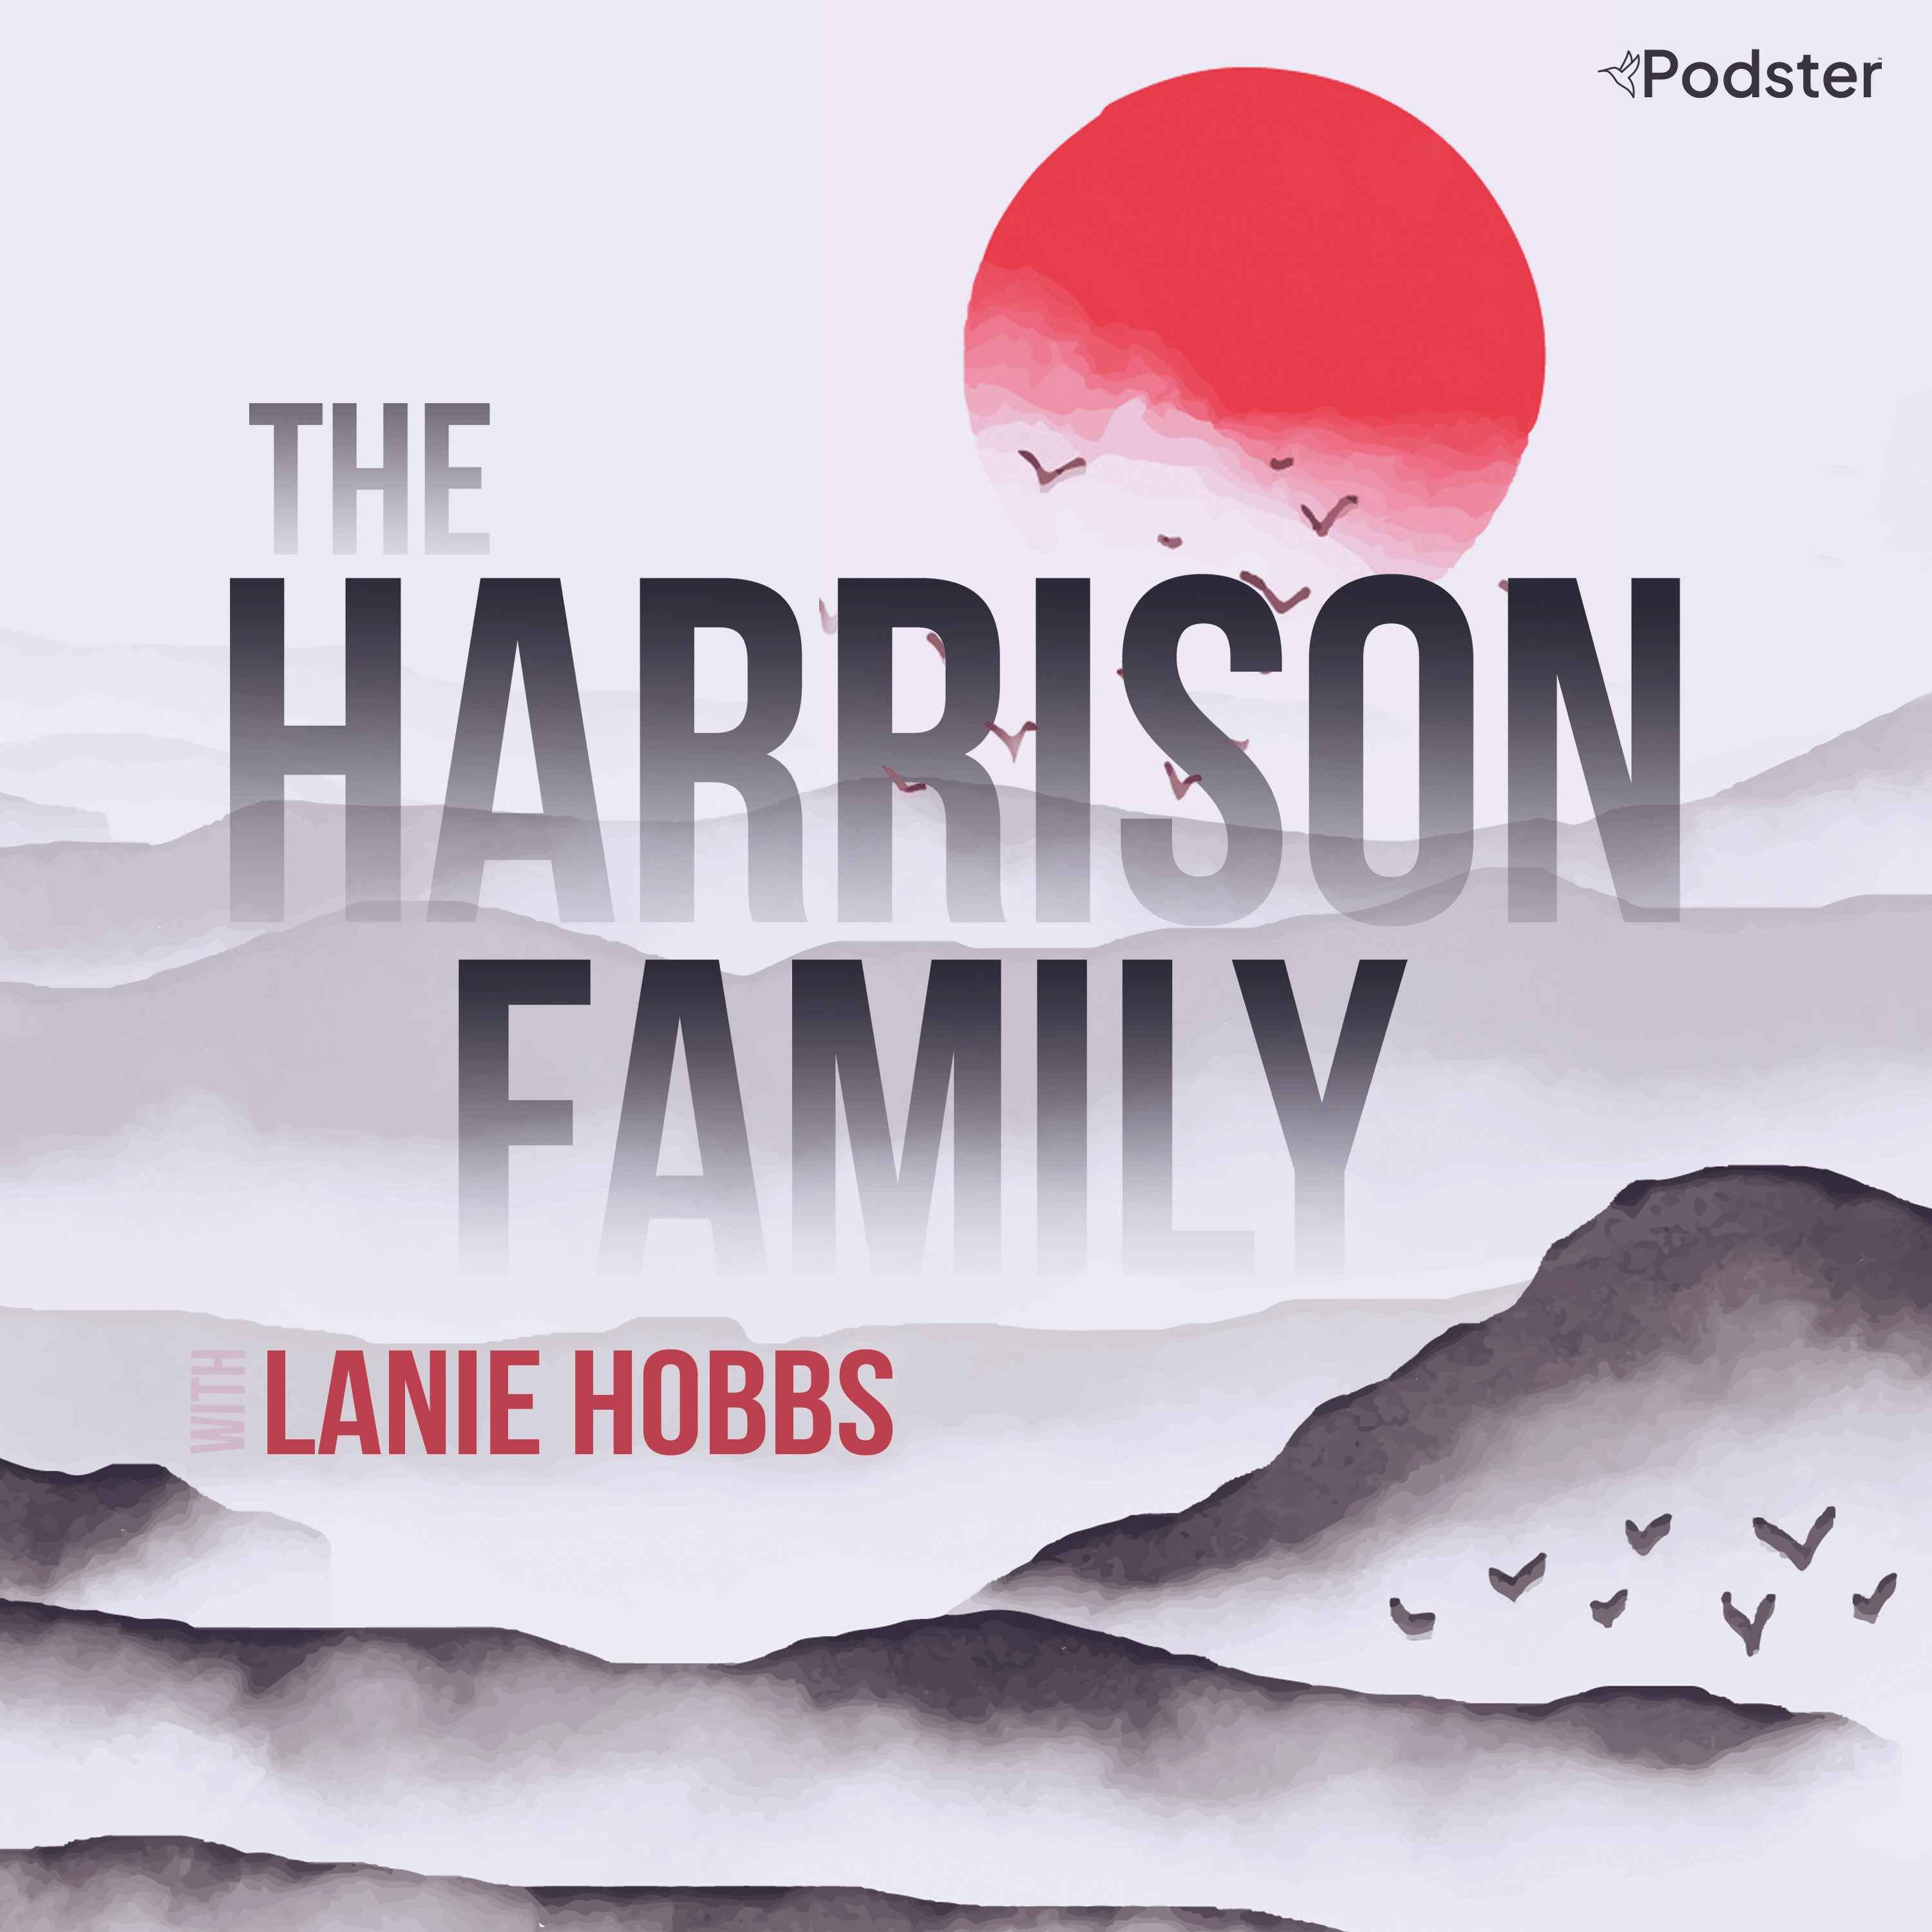 9. The Harrison Family